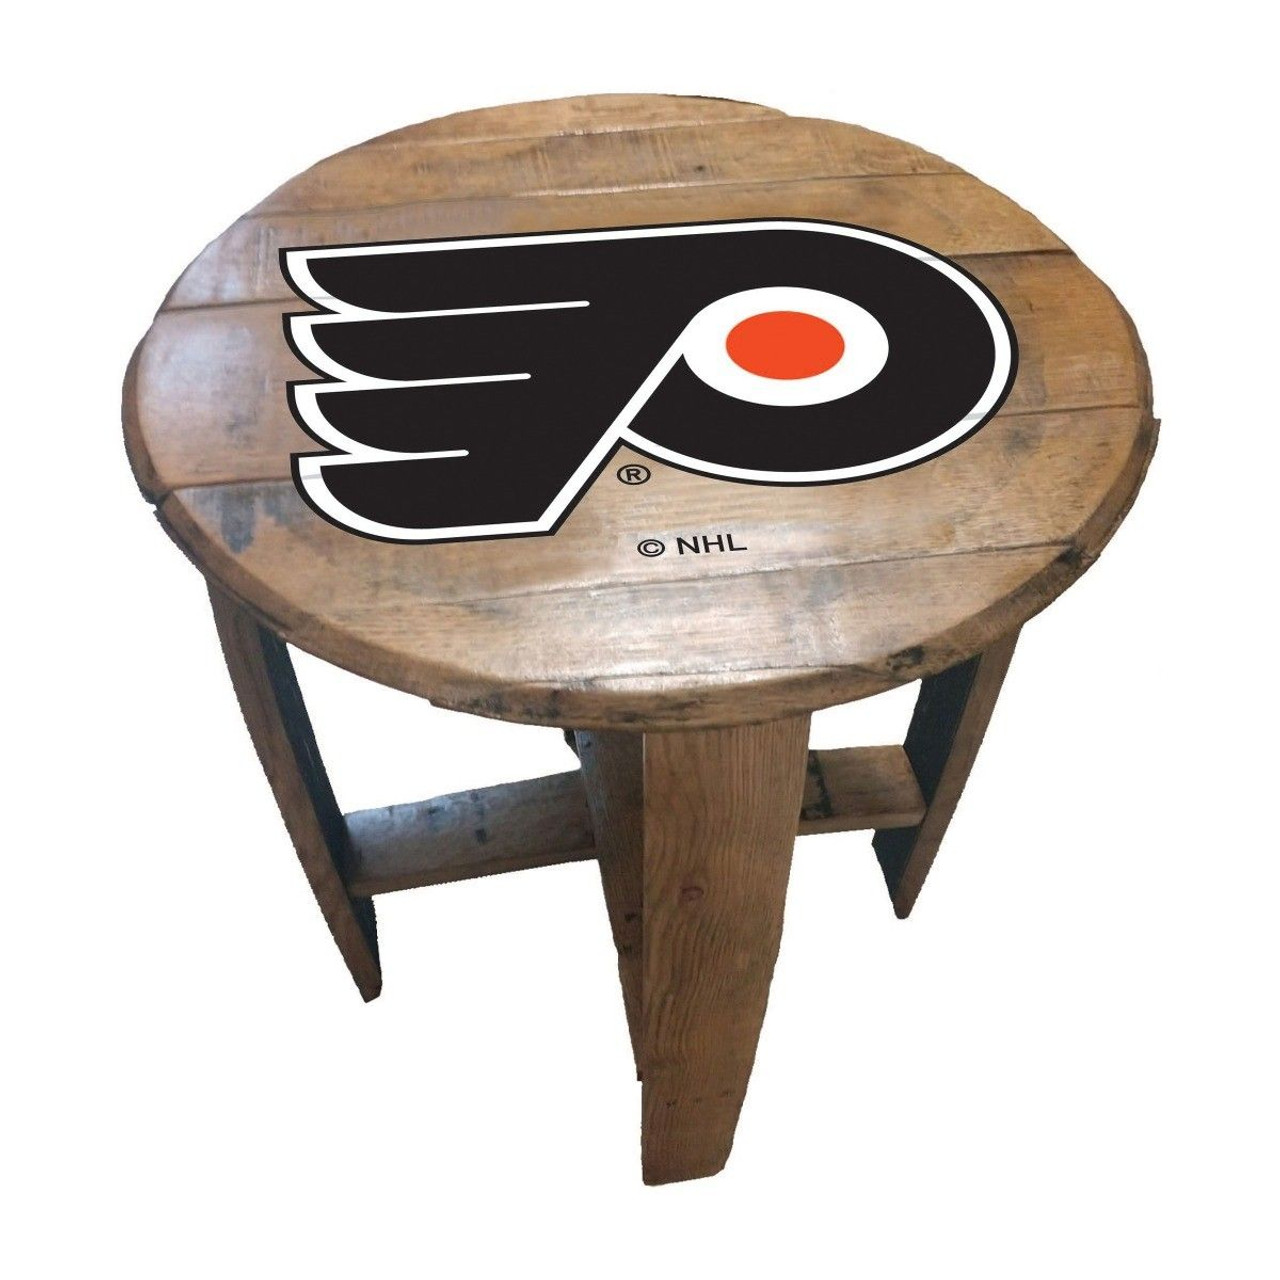 629-4004, Philadelphia, PHI, Philly, Phily, Flyers, Oak, Whiskey, Bourbon, Barrel, Side, Table, FREE SHIPPING, NHL. Imperial